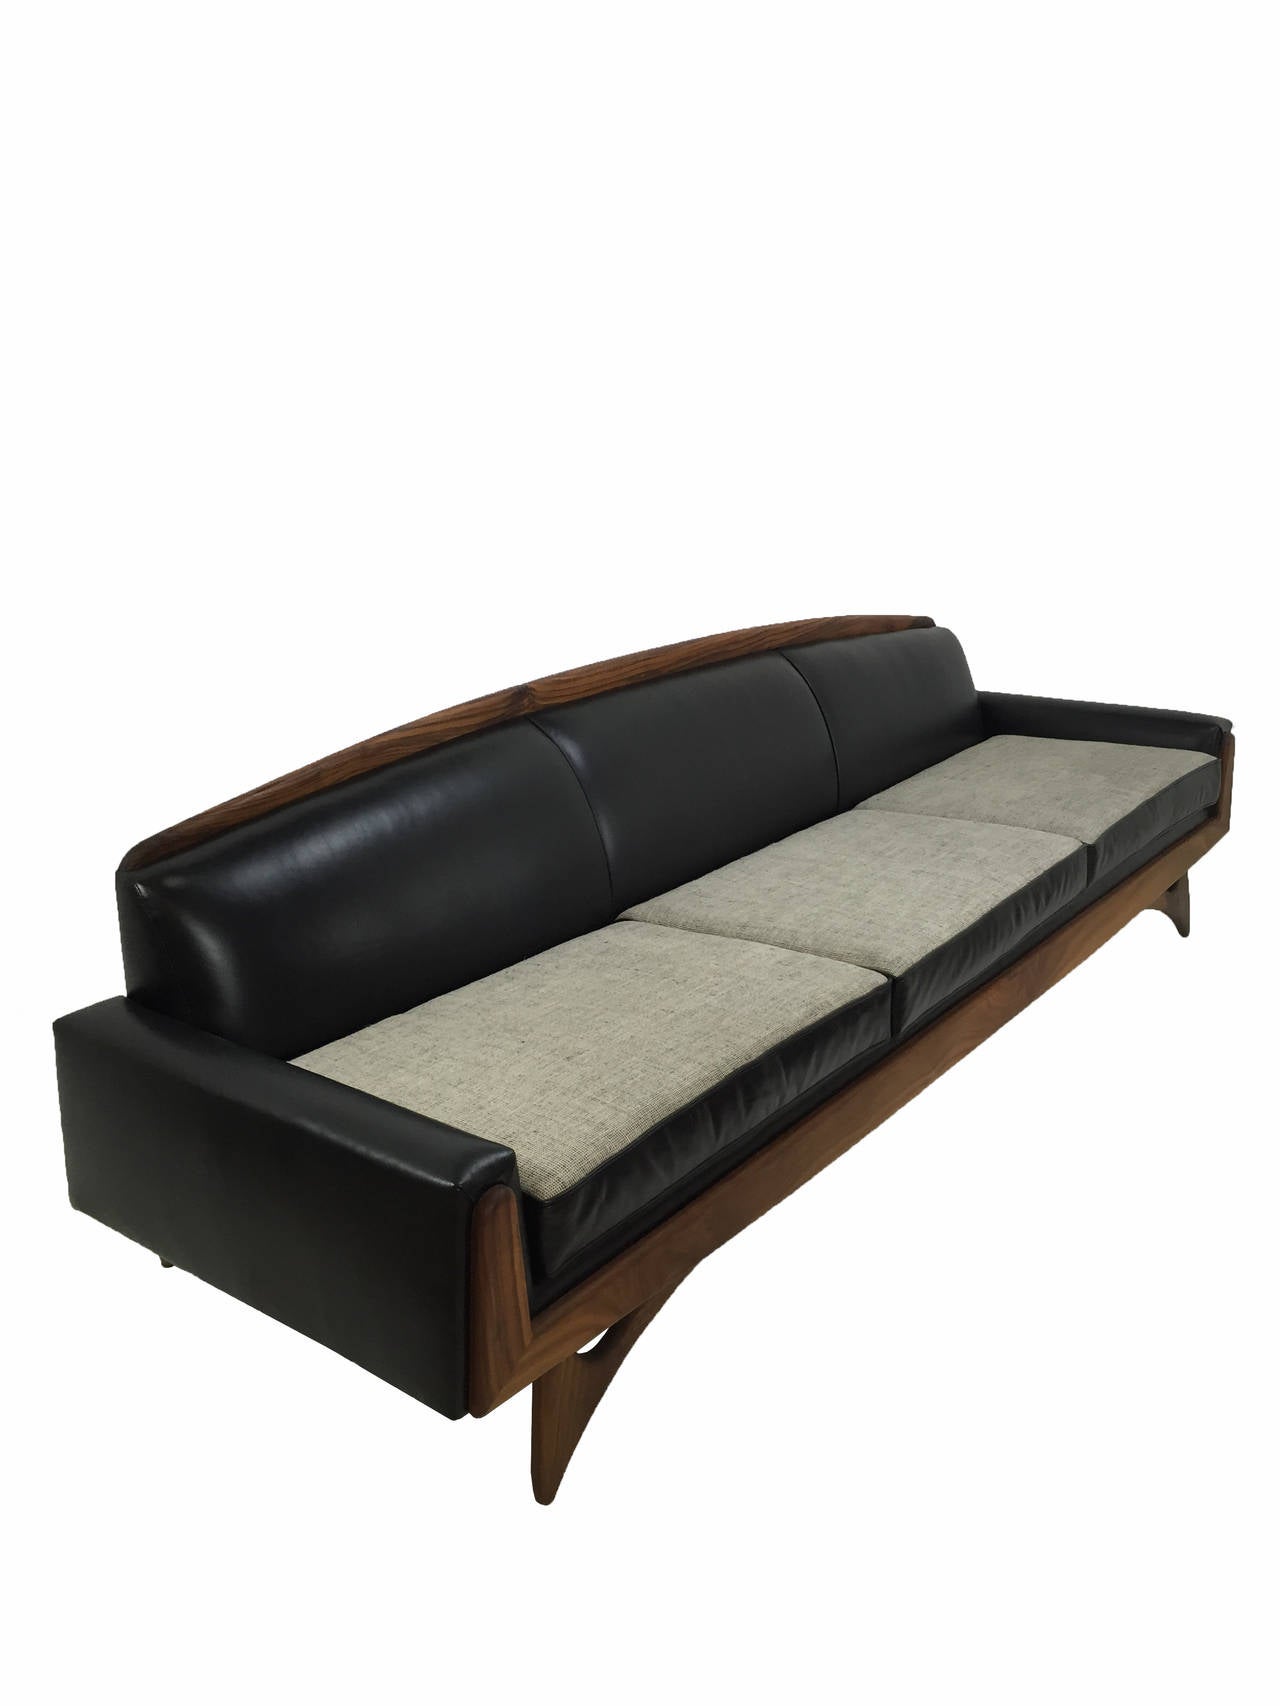 Modern Handsome Adrian Pearsall Sofa in Walnut and Black Leather